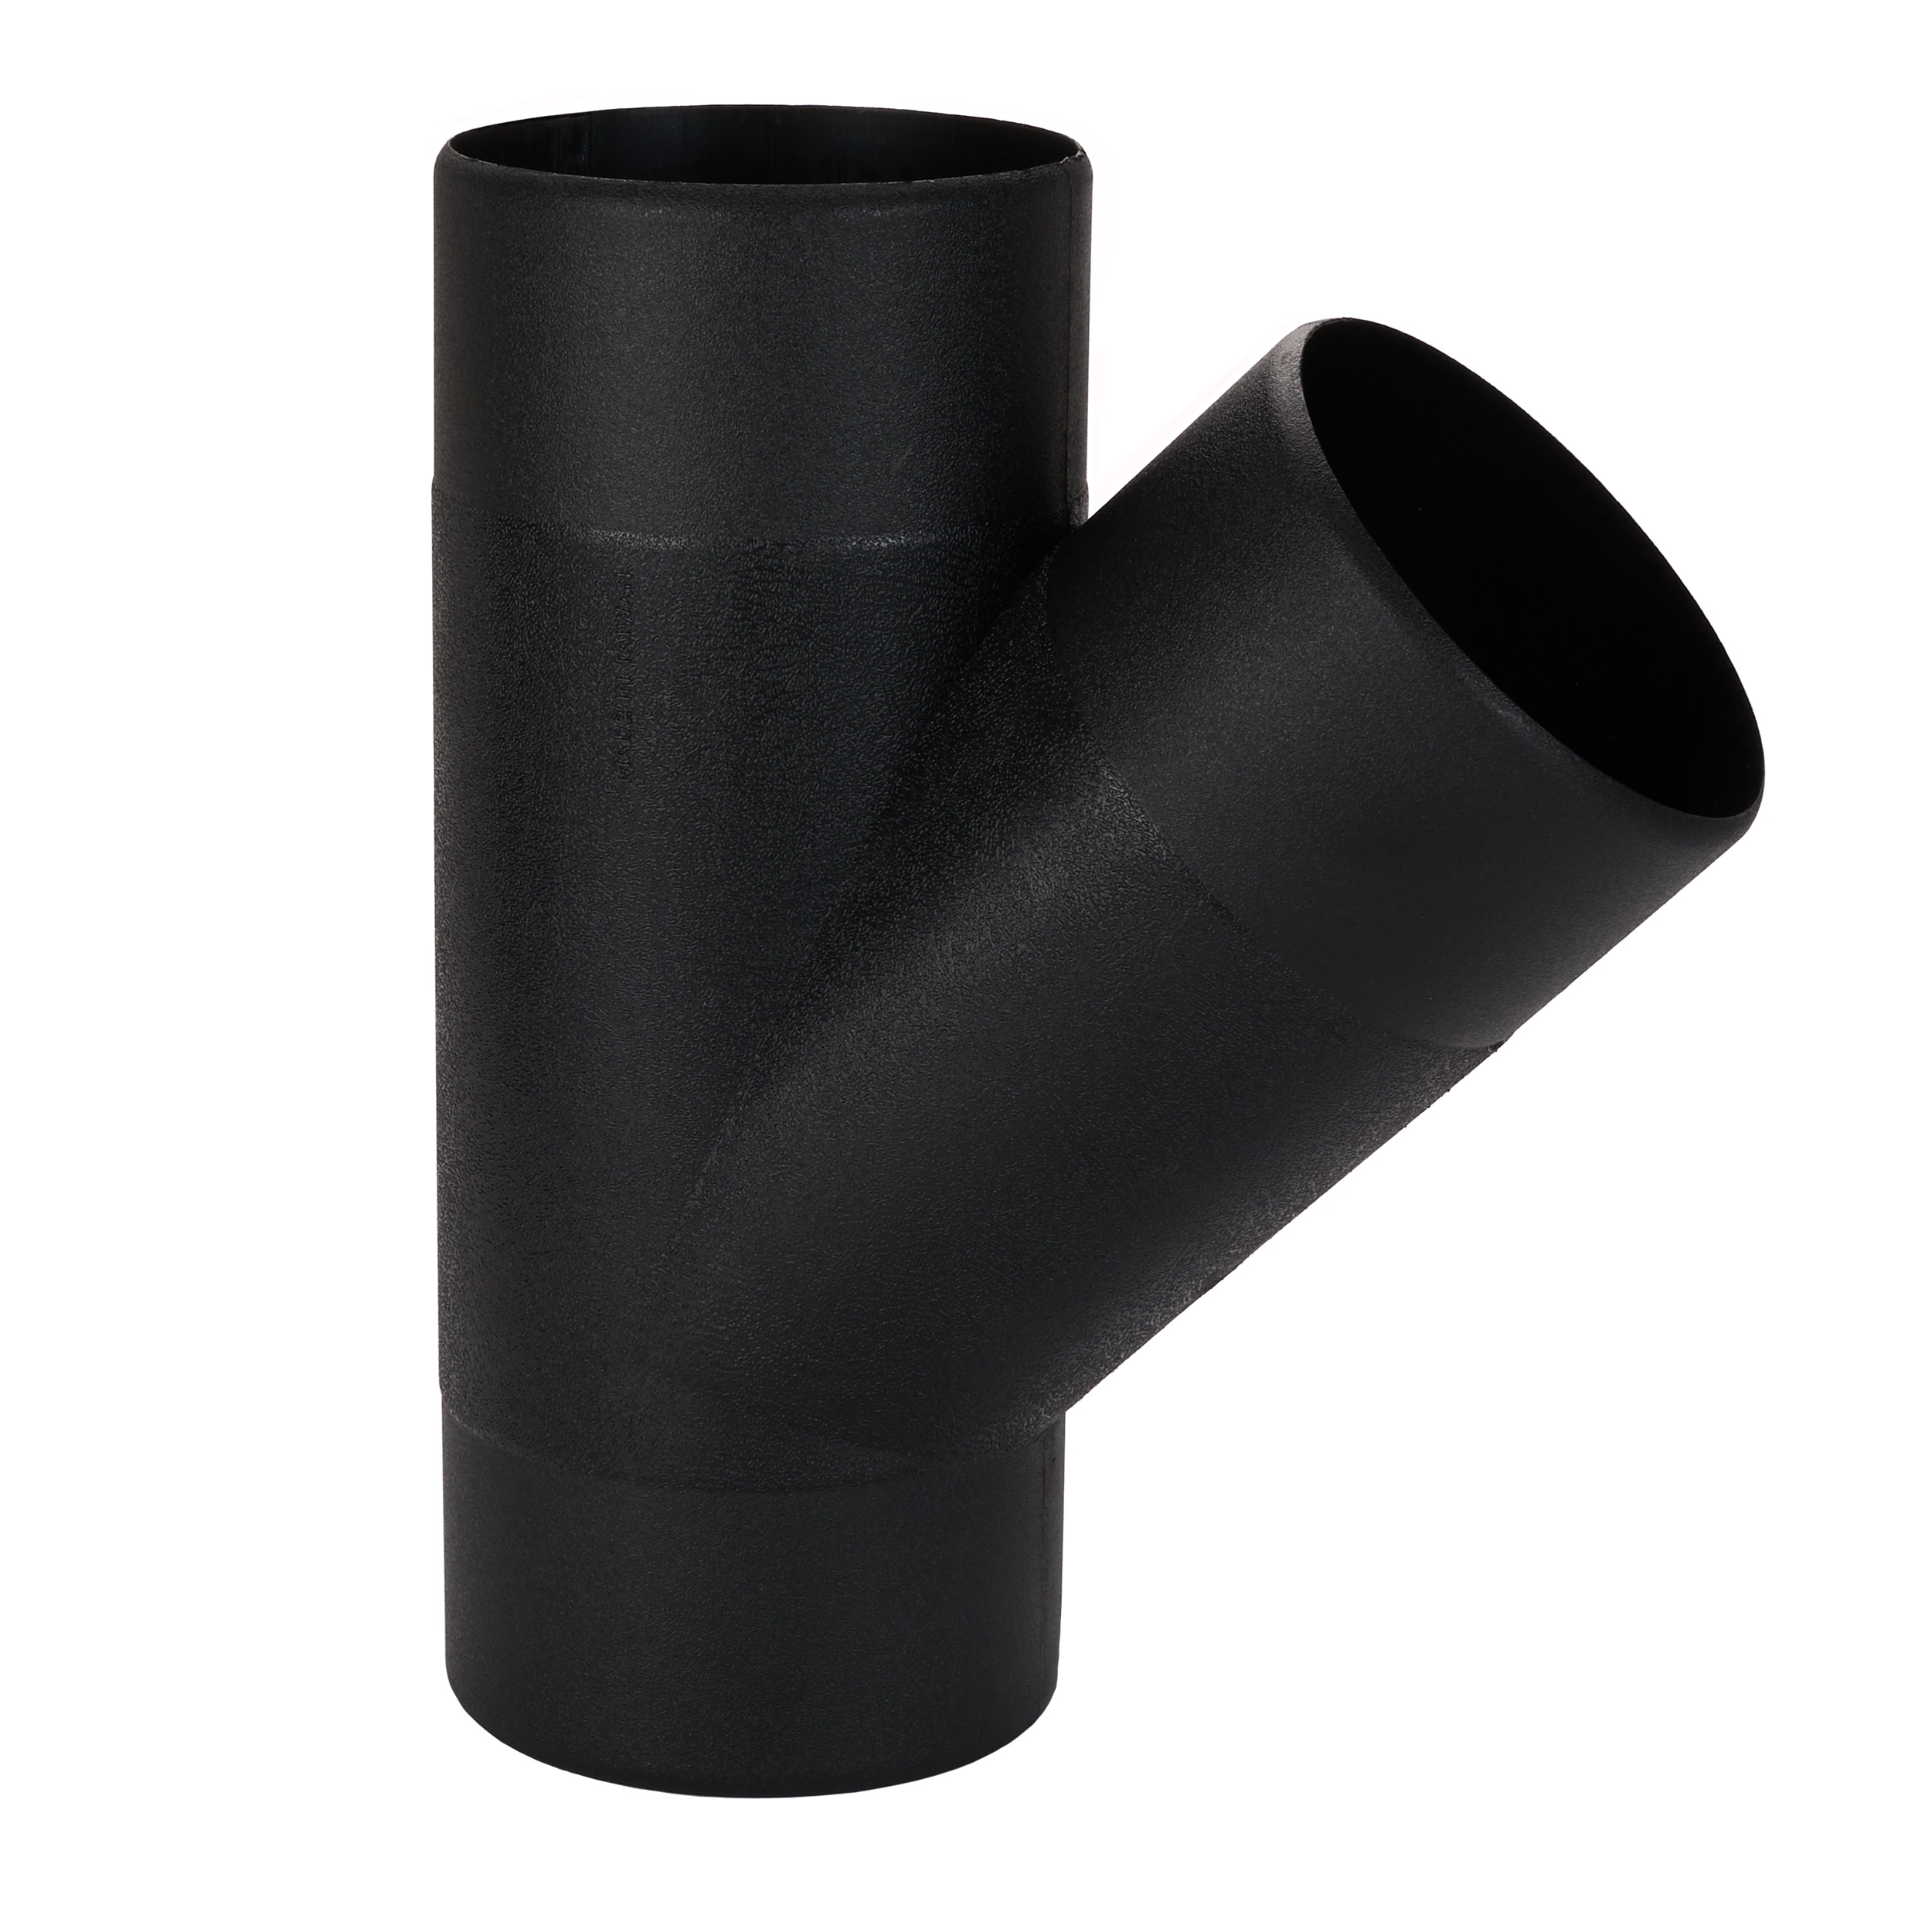 5-inch X 5-inch X 5-inch "y" Dust Collection Fitting